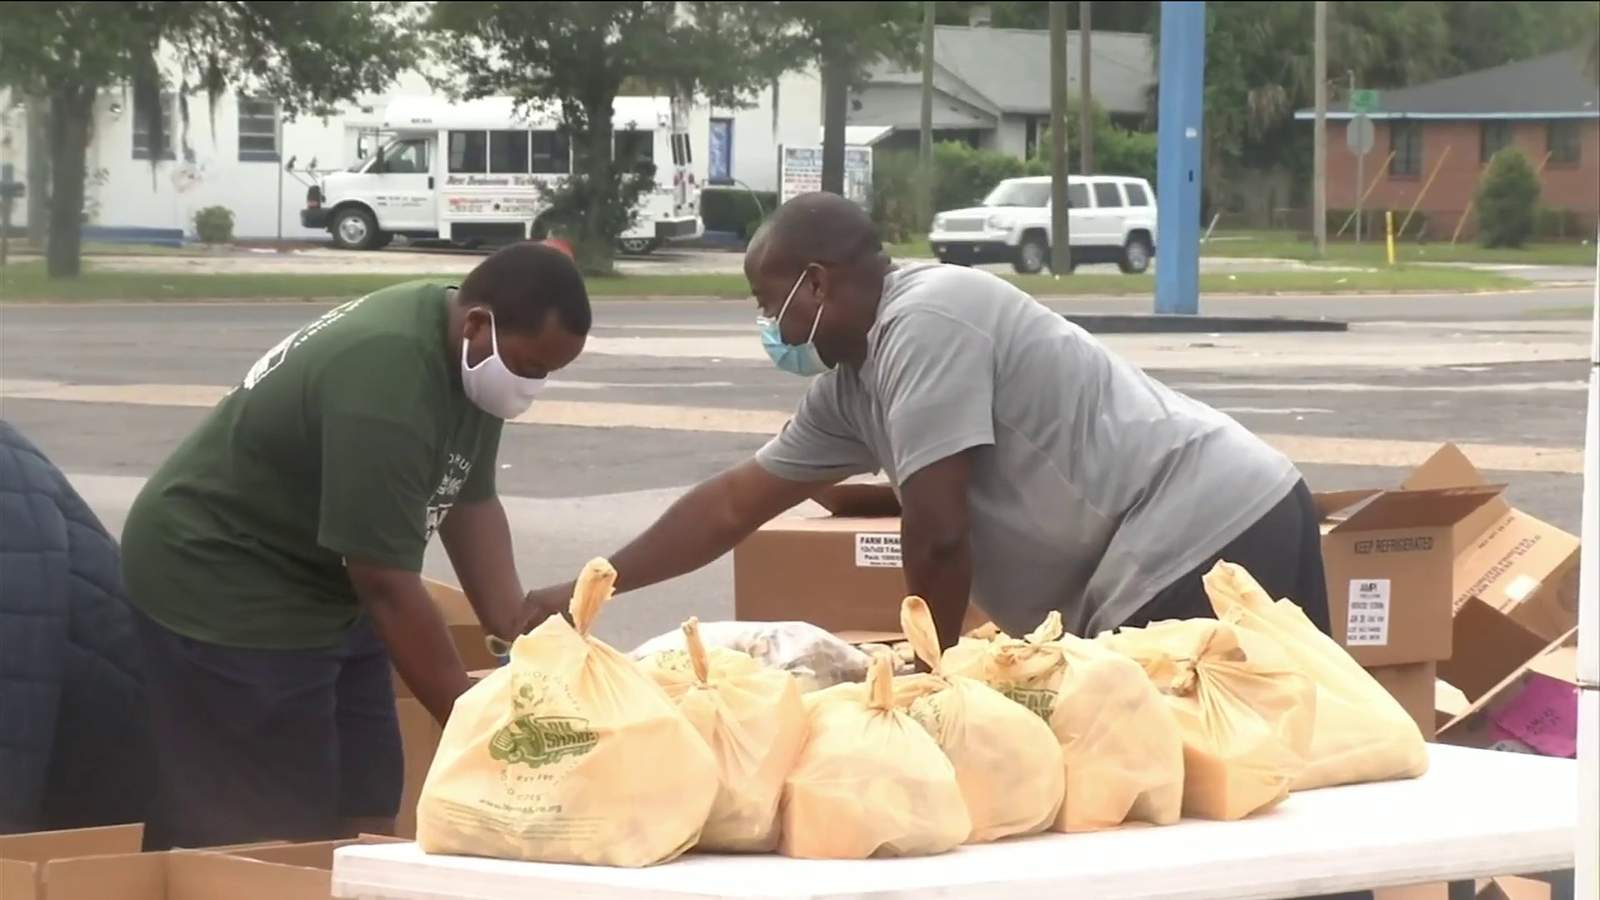 Farm Share food distribution event in Duval County on Saturday